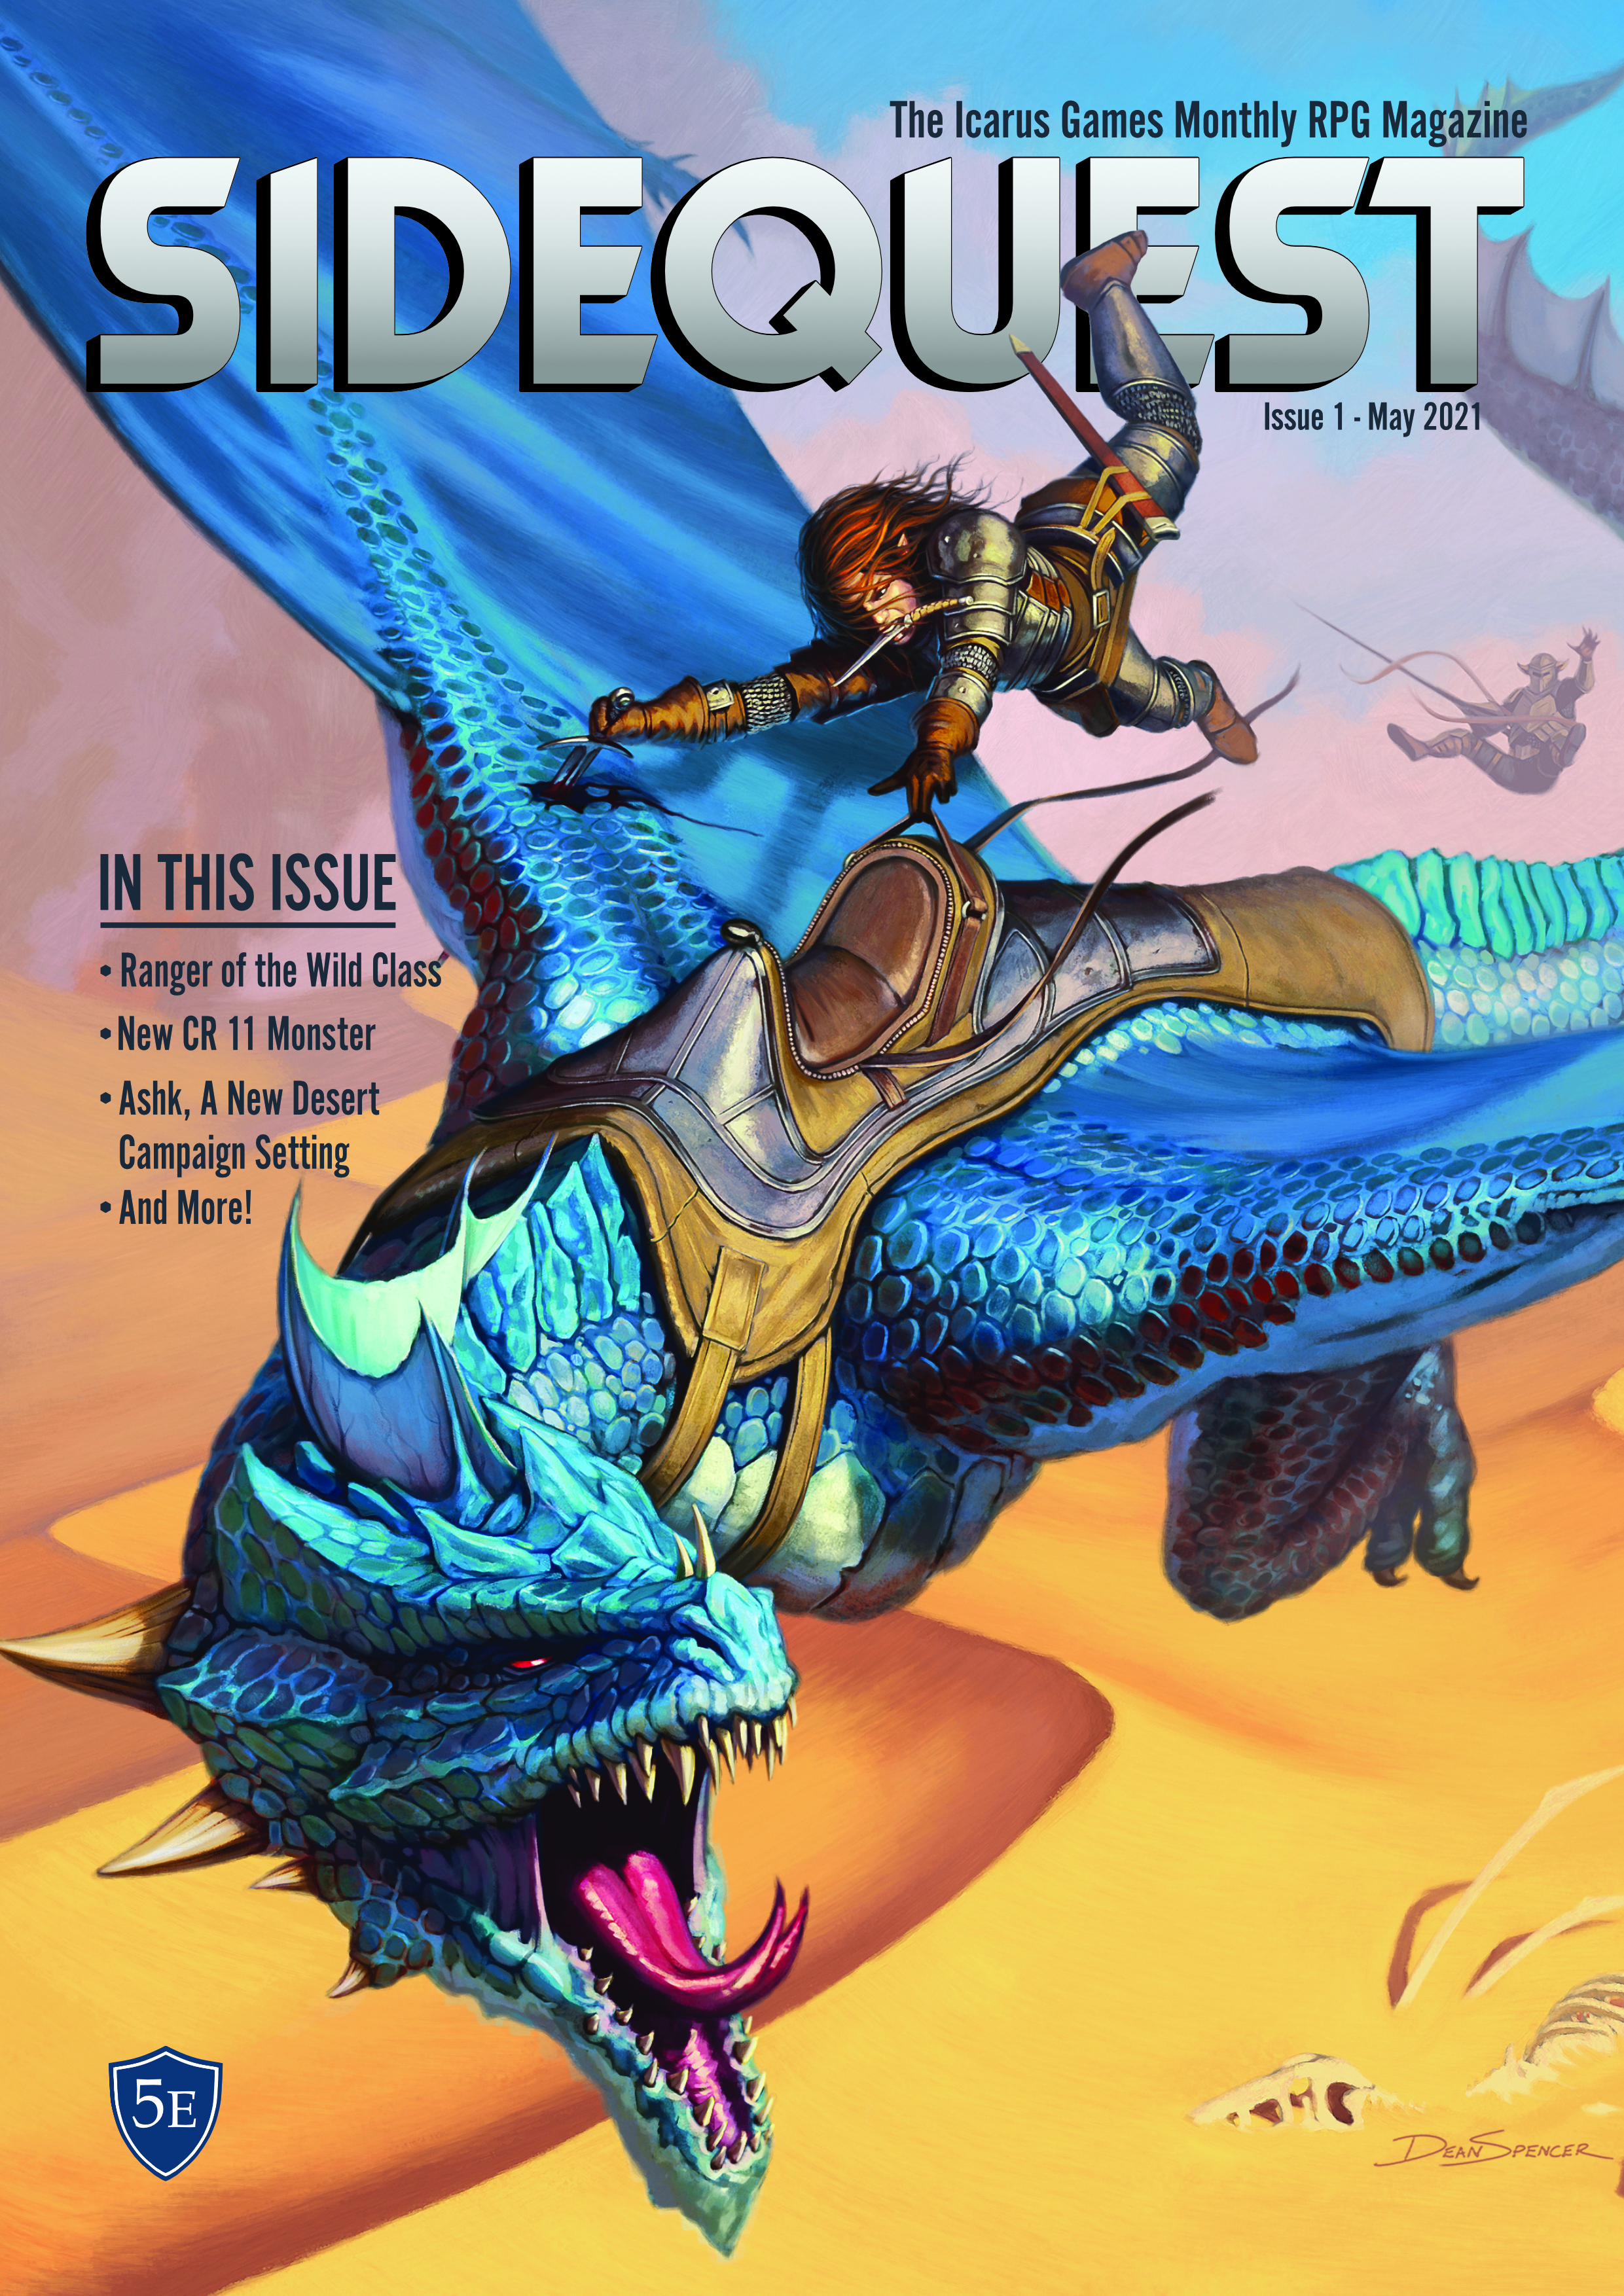 Sidequest Issue 1 Cover_1.jpg